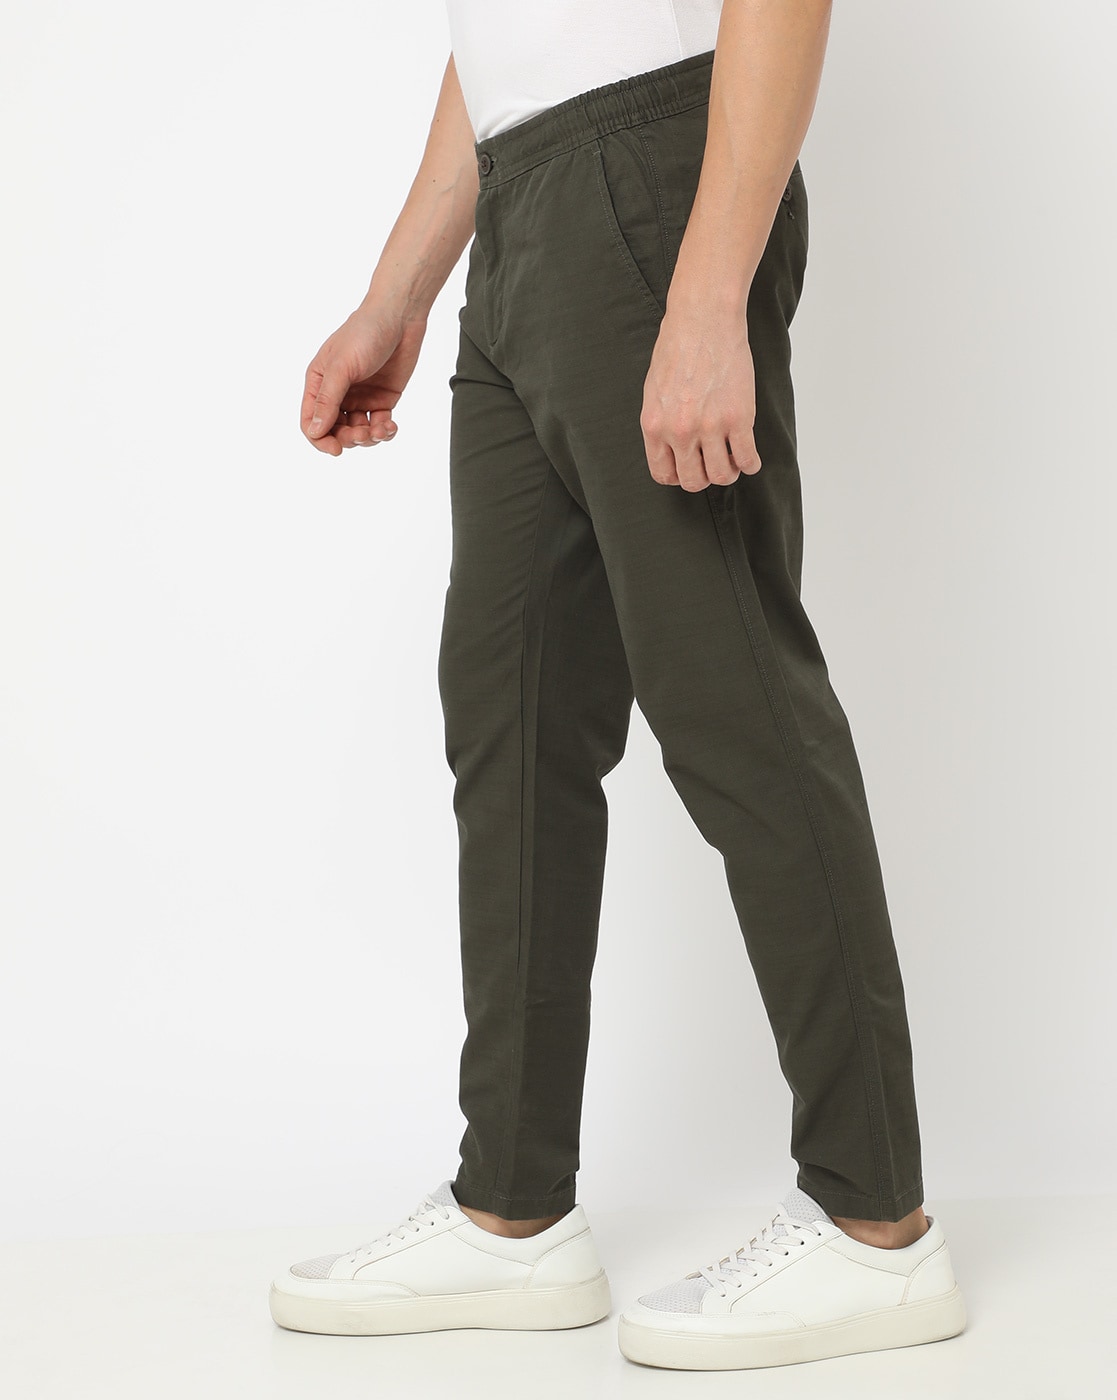 Versatile Styling Ideas for Green Pants